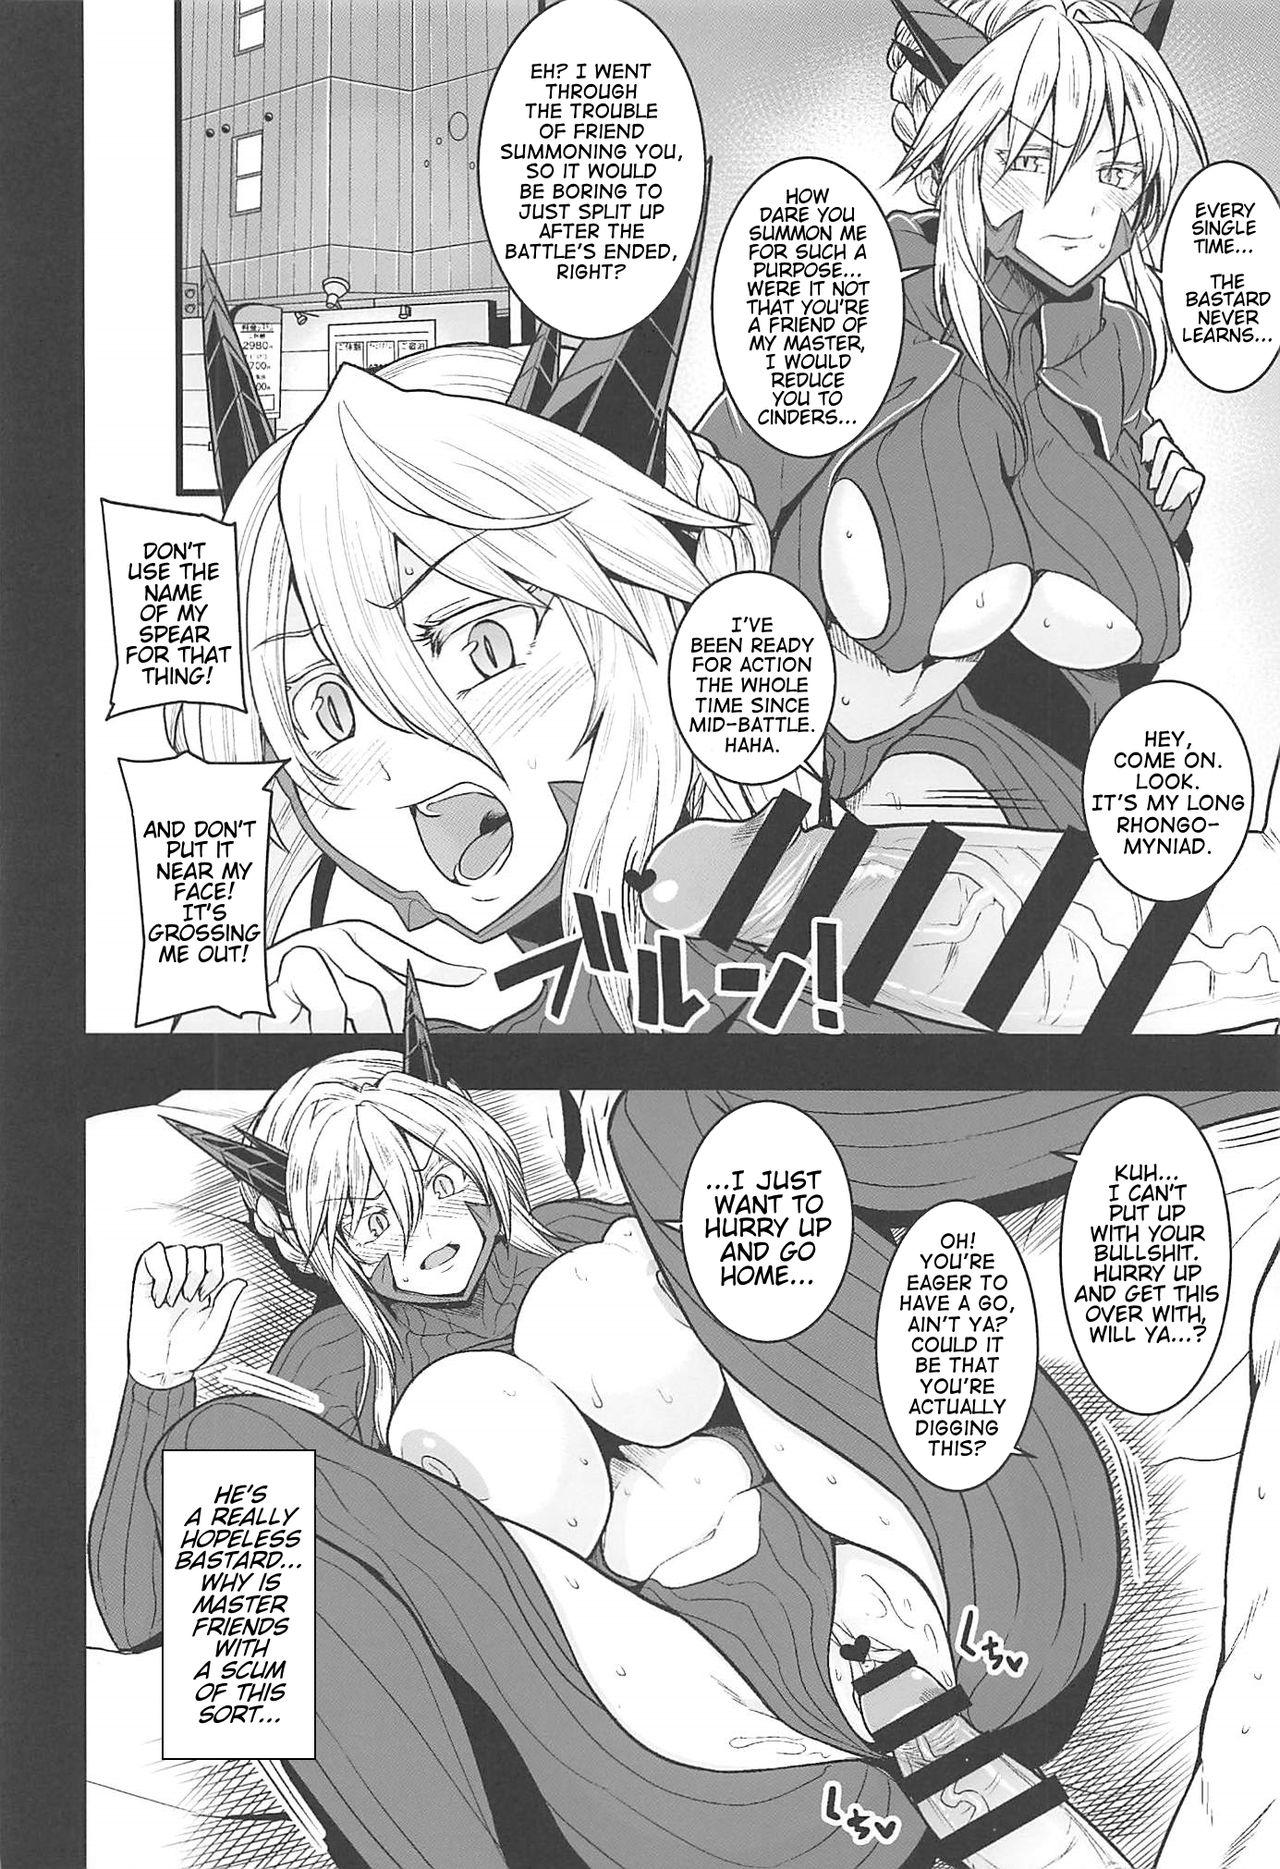 Marido Friend Master to | With Friend Master - Fate grand order Speculum - Page 3